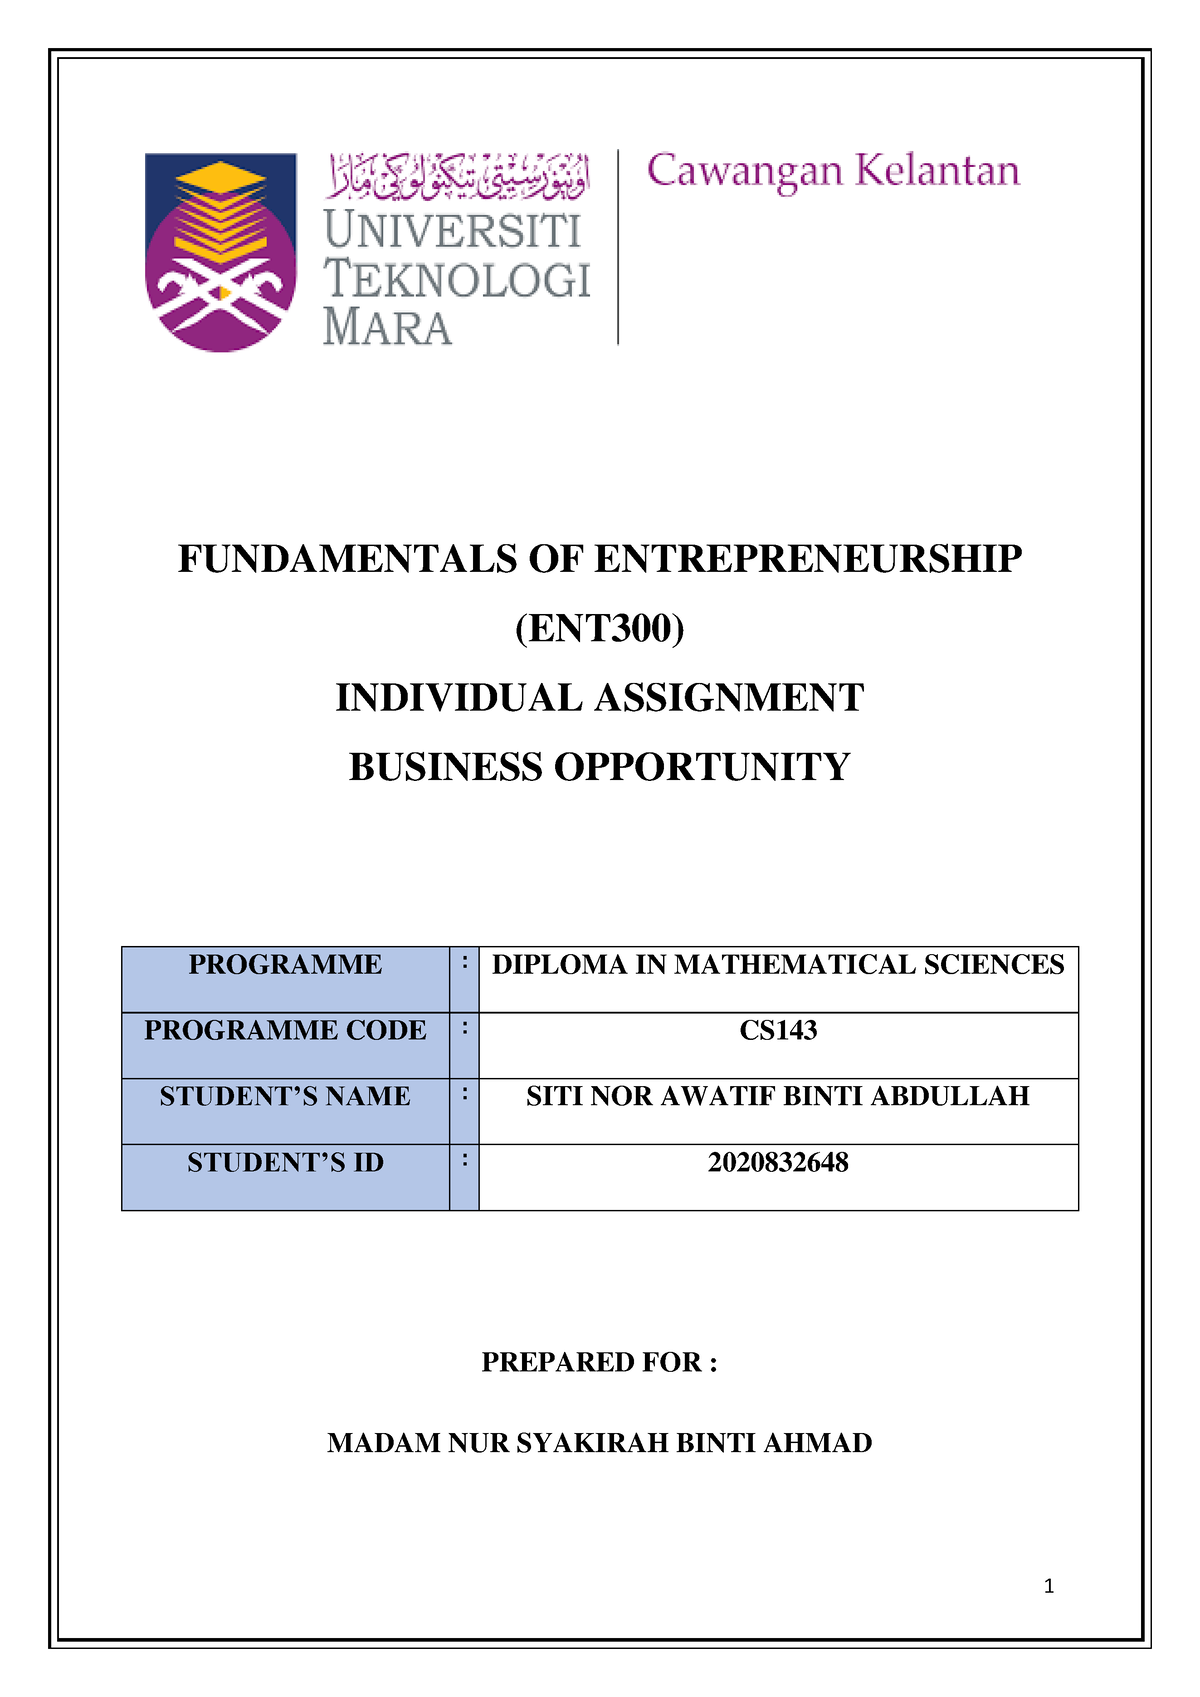 business opportunity ent300 individual assignment scribd